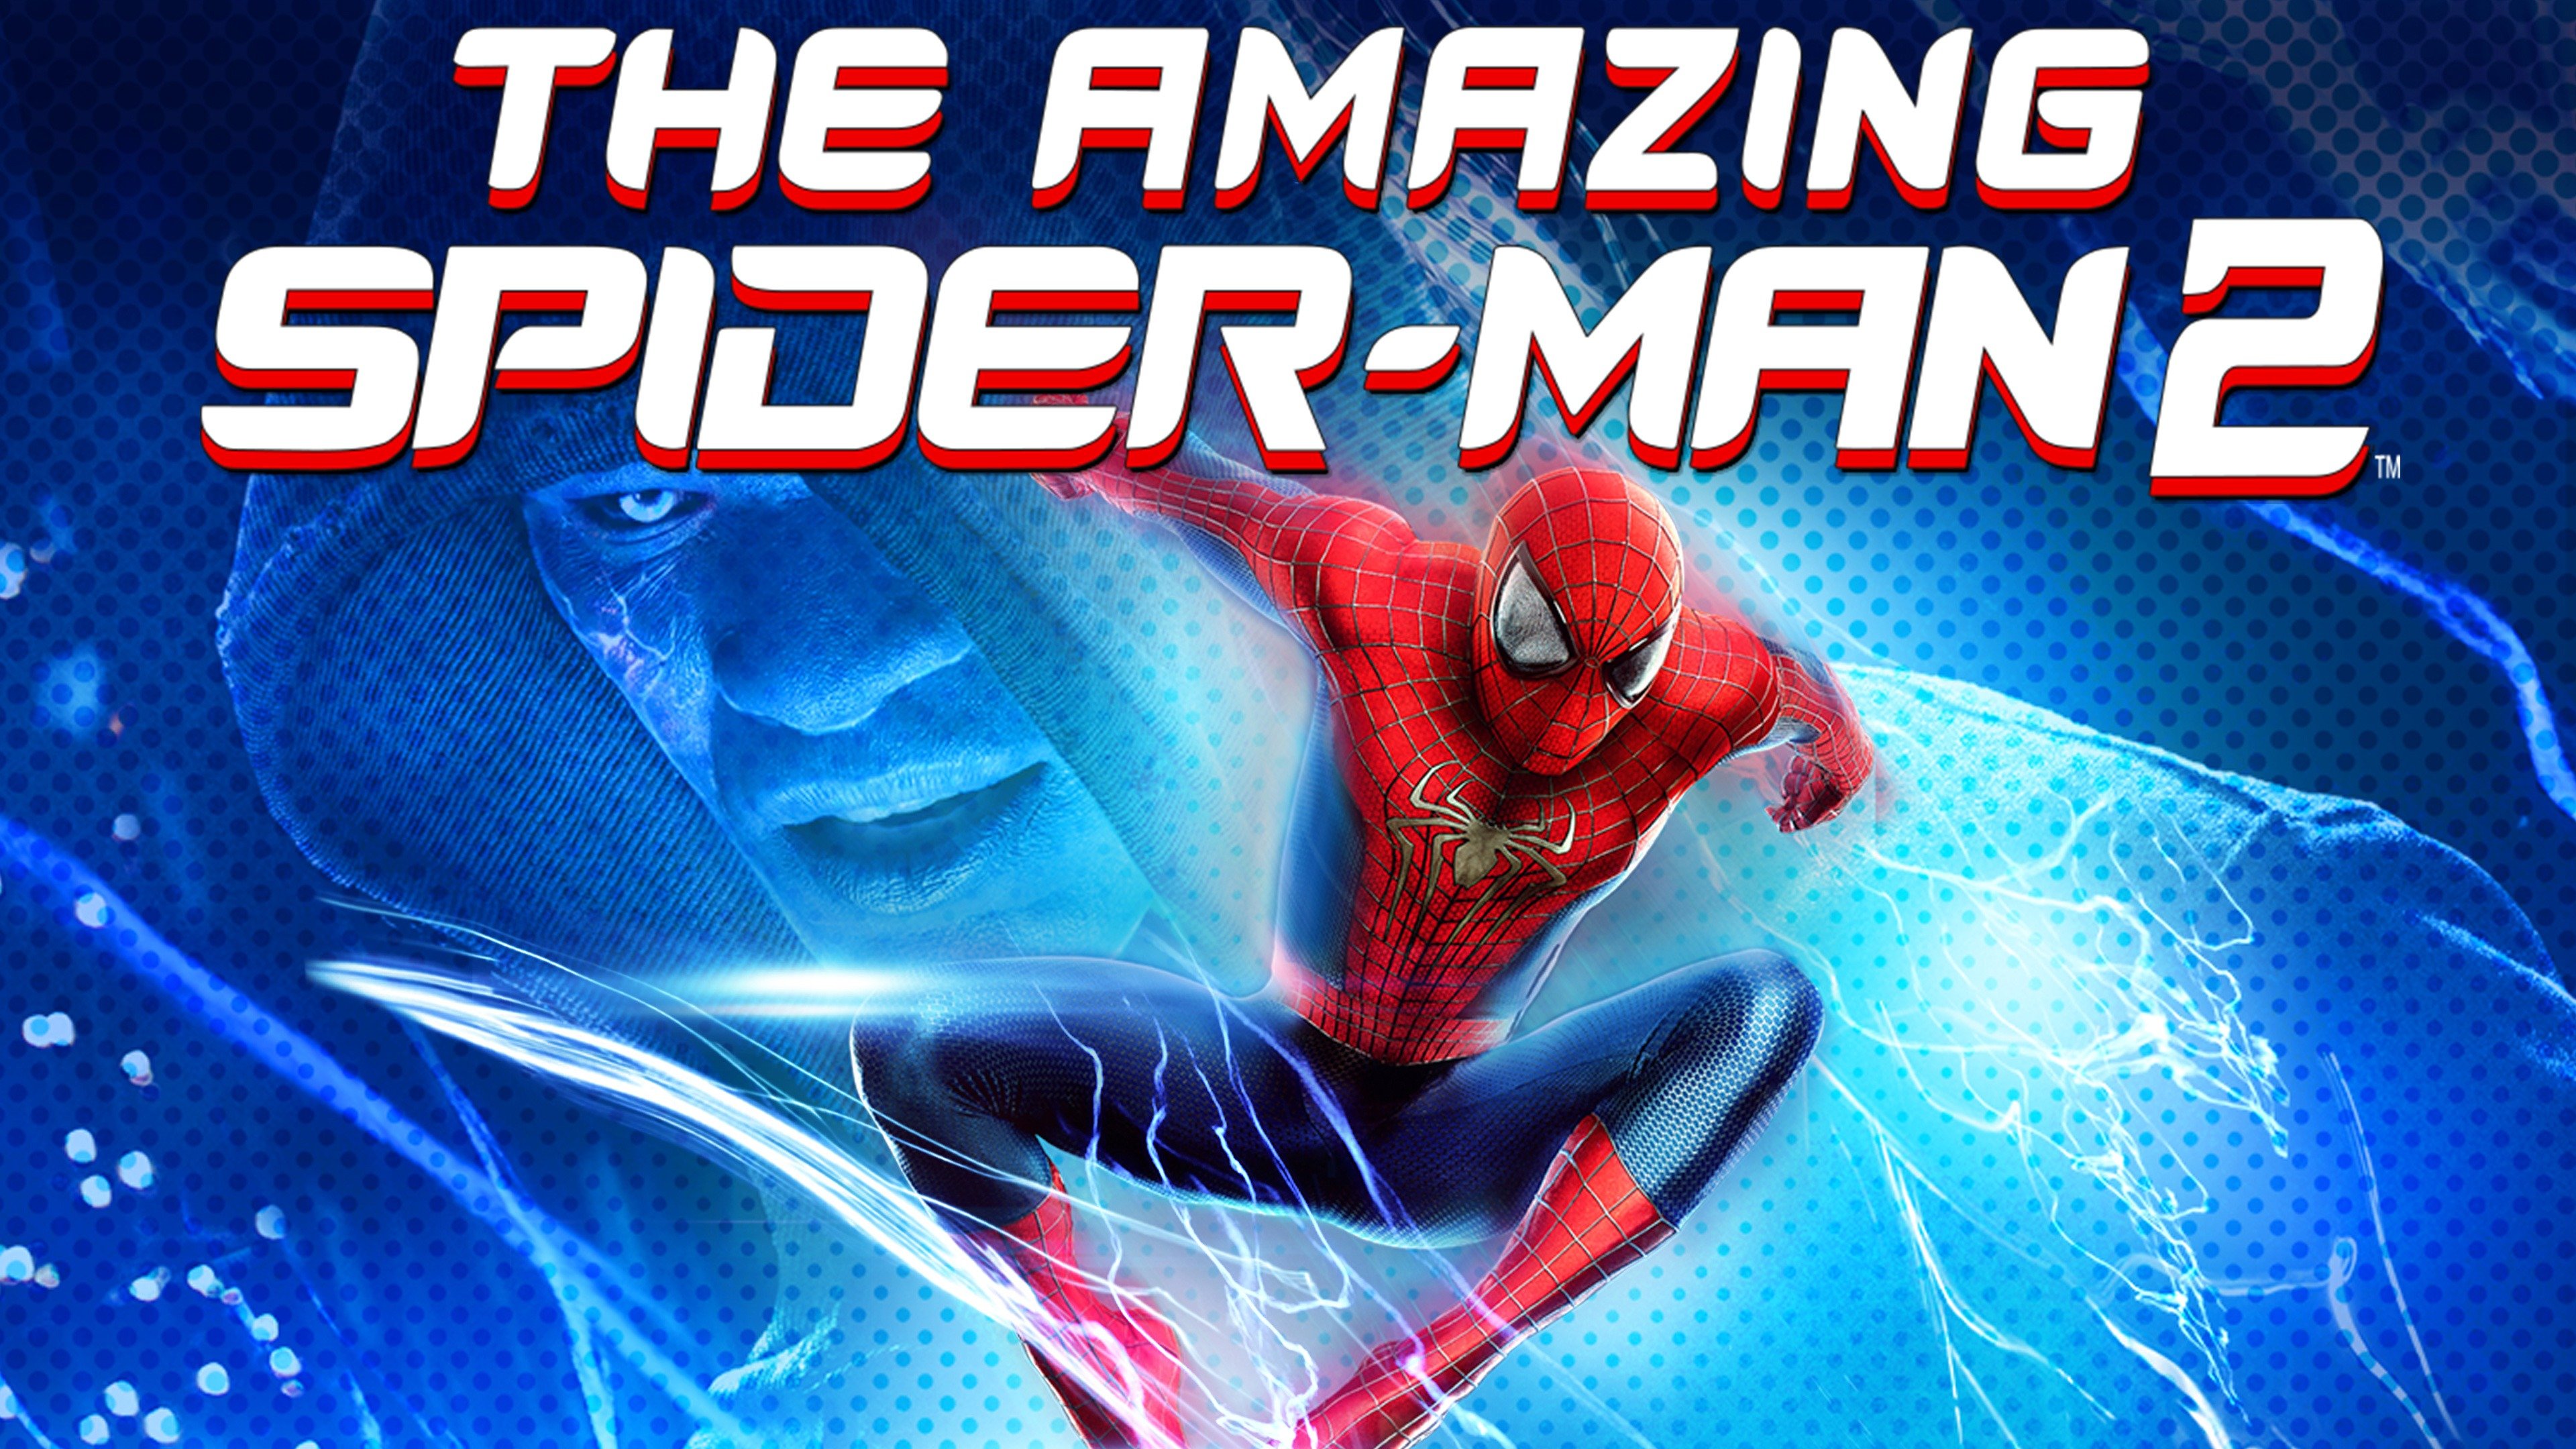 Watch The Amazing Spider-Man 2 Online with NEON from $4.99